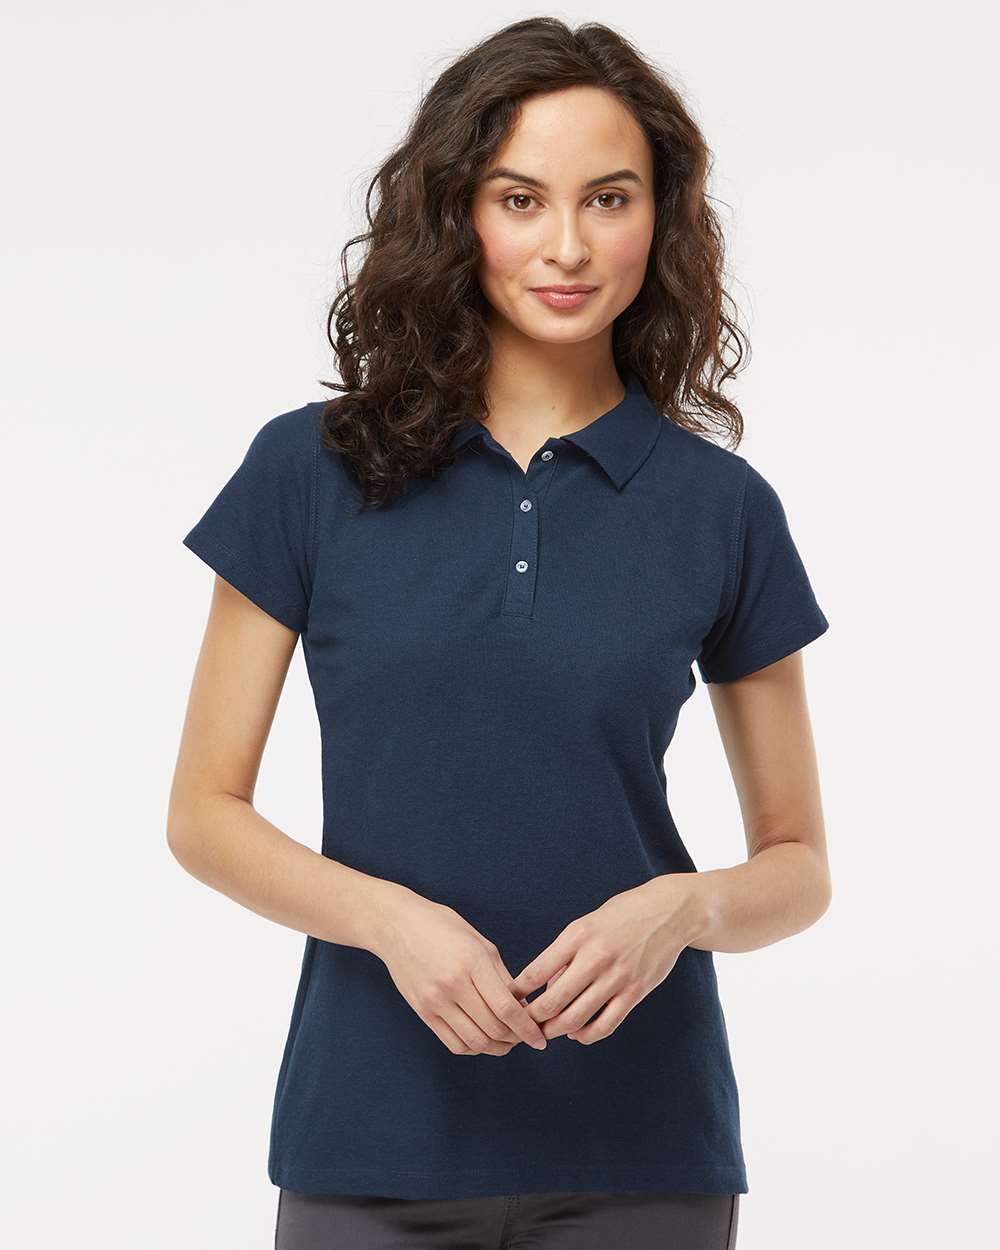 M&O Women’s Soft Touch Polo #7007 Navy